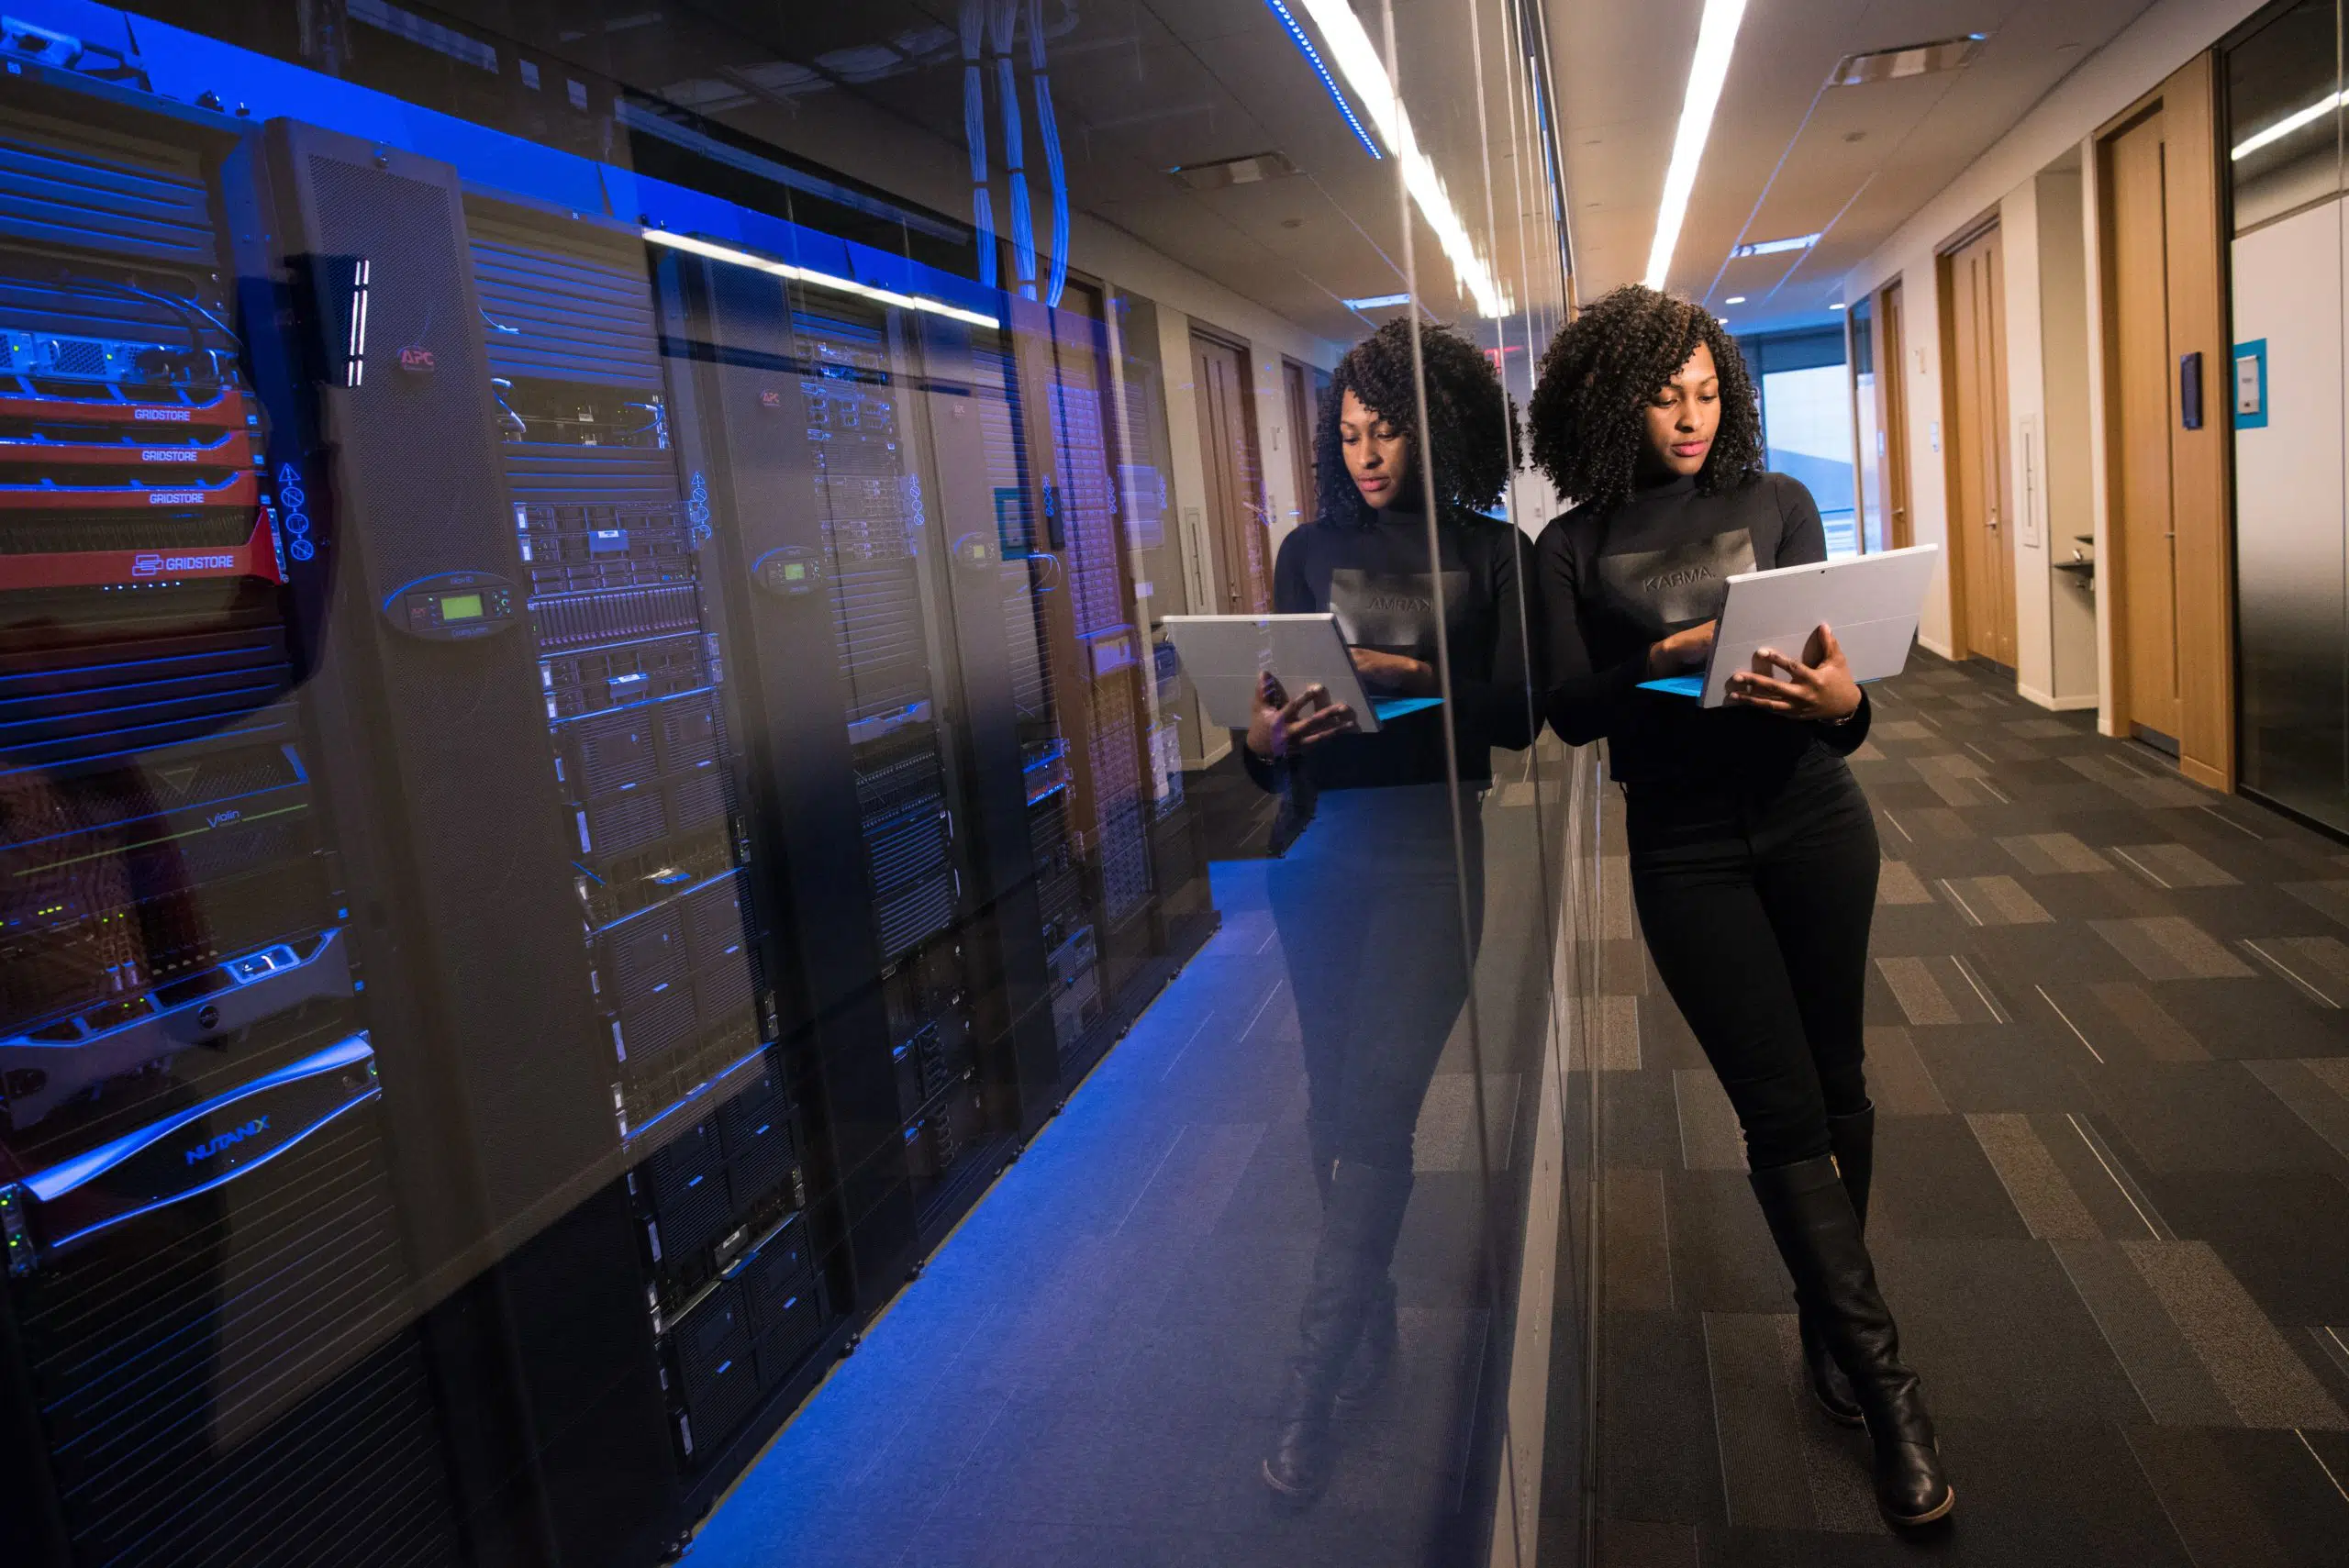 Black woman holding a laptop leans into a glass wall where we can see large computer services.